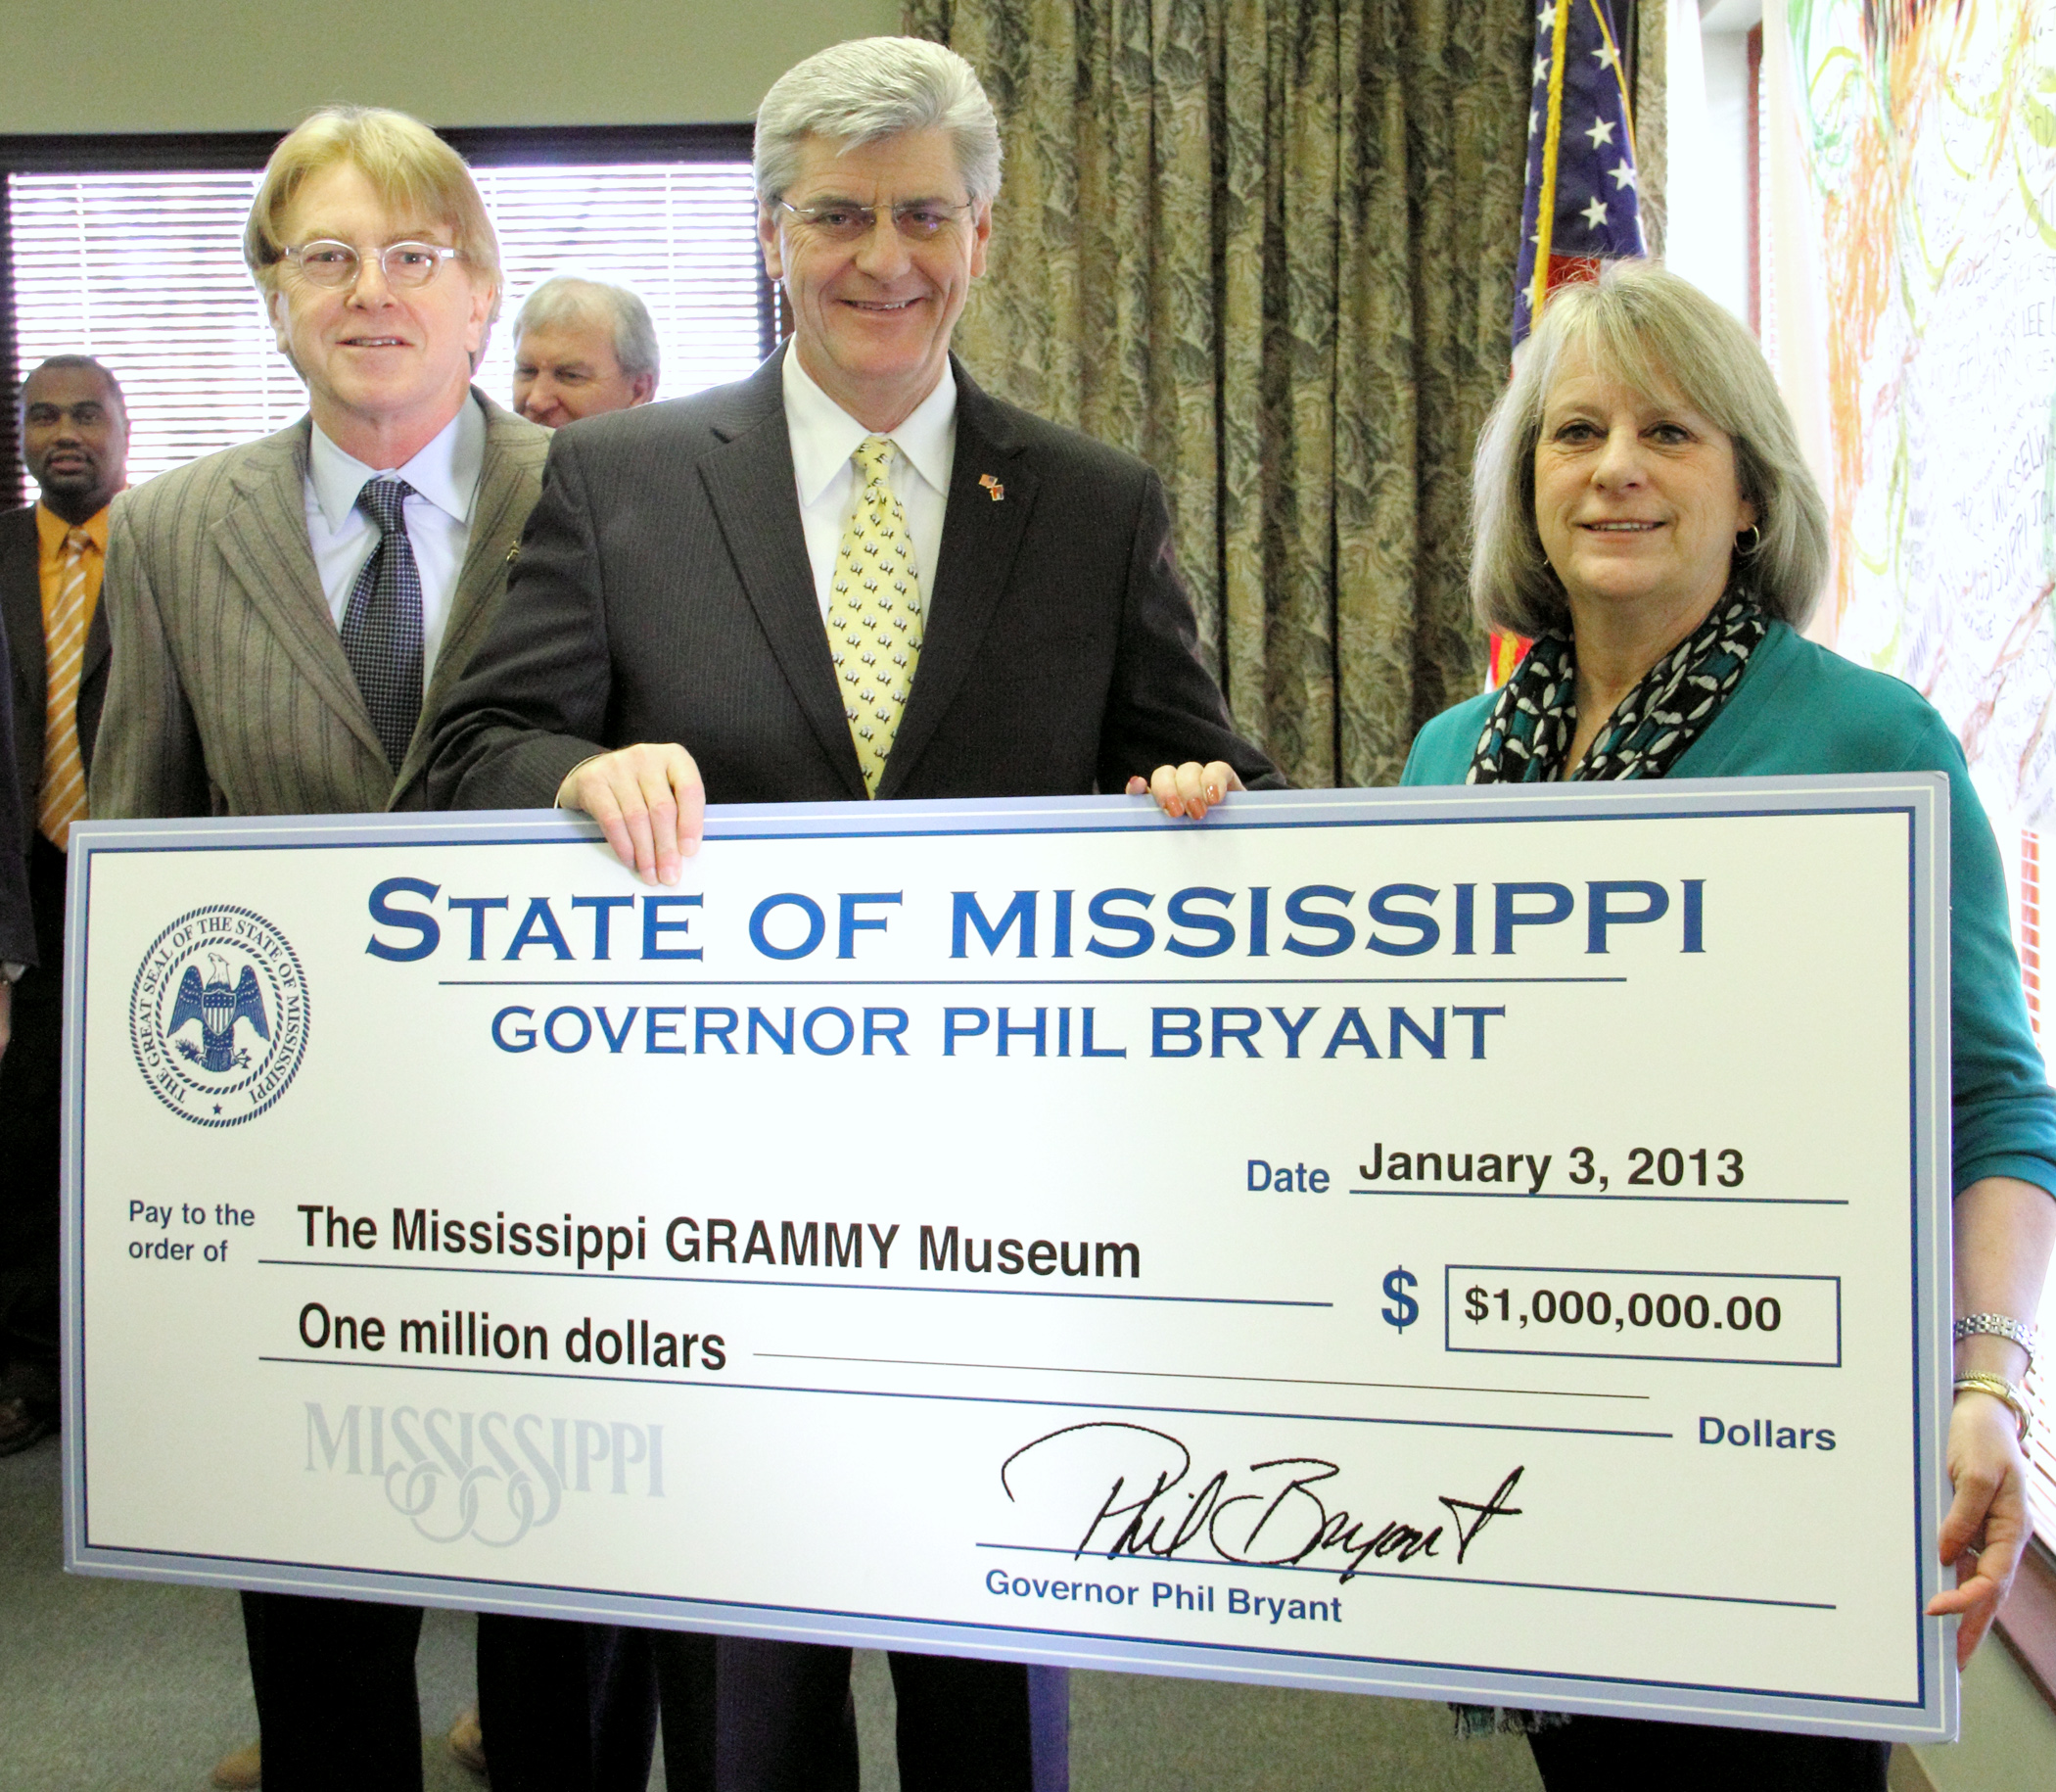 PHOTO:  From left, Jon Hornyak, Sr. Executive Director of The Recording Agency of Memphis, Tenn., Governor Phil Bryant, and Lucy Janoush, President of the Cleveland Music Foundation.